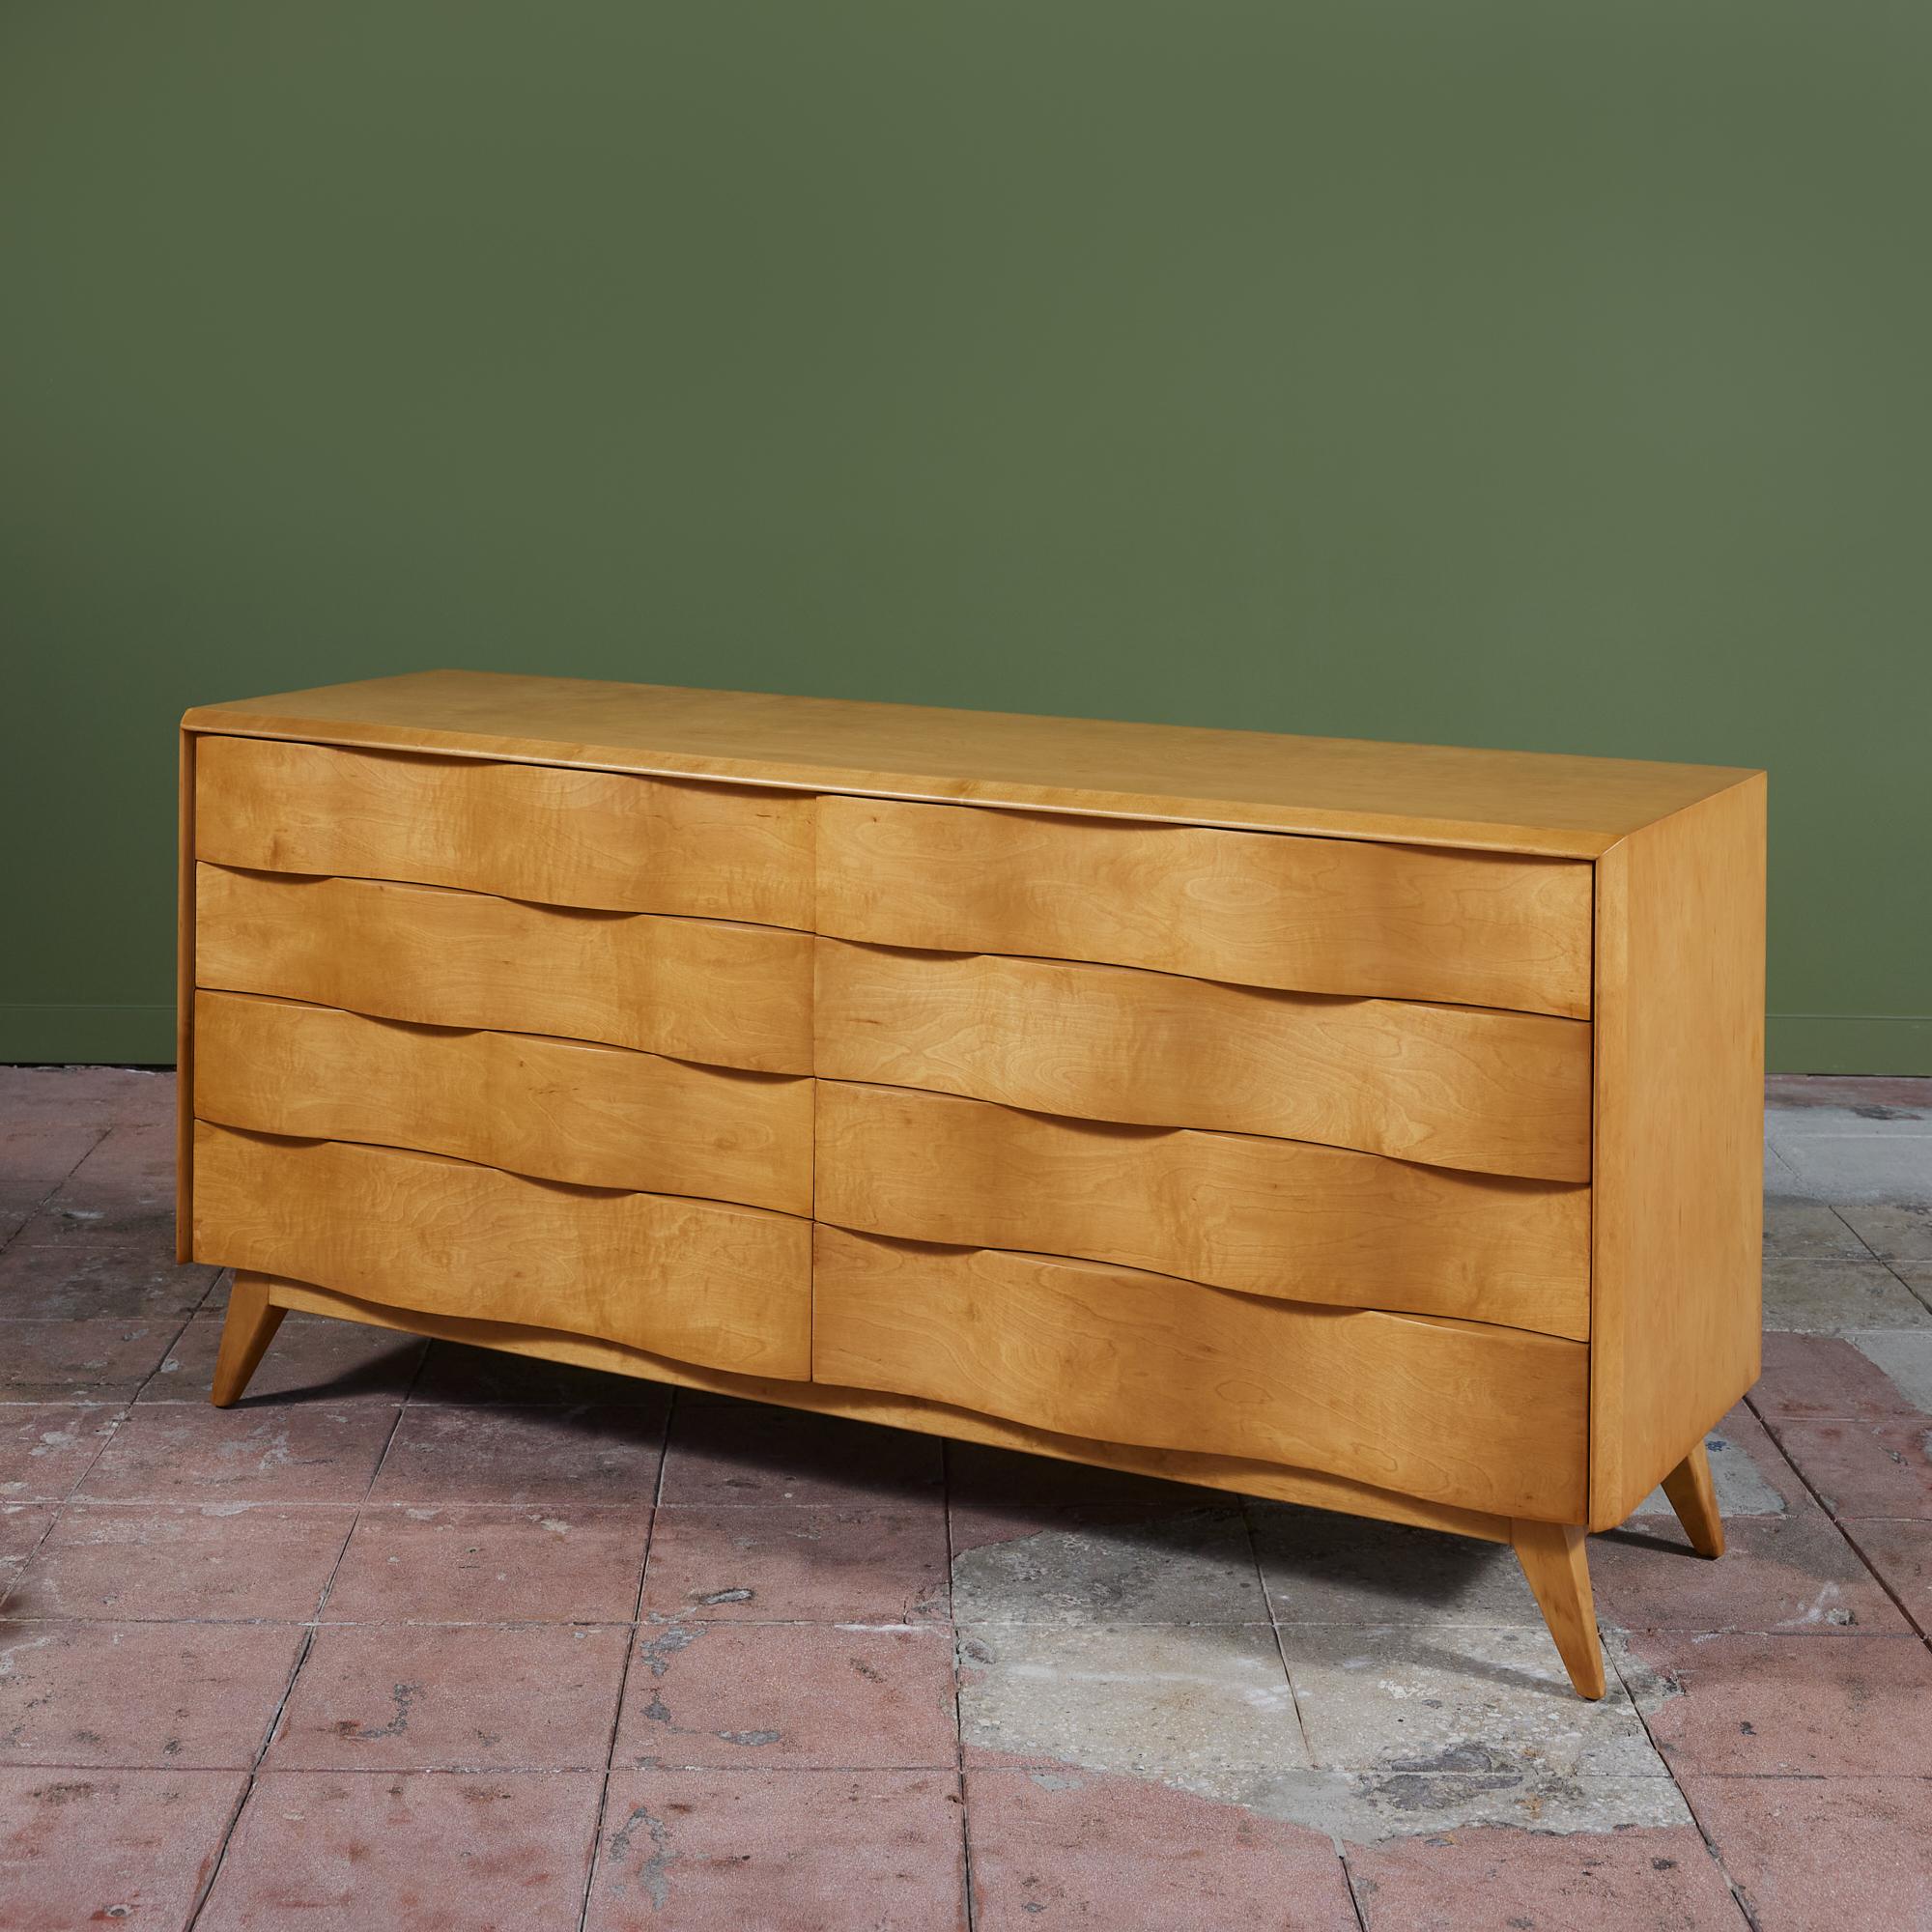 Dresser by Edmond Spence, c.1950s, Sweden. The maple dresser features eight drawers with a unique sculpted wave front design. The dresser rests on 4 splayed legs.

Dimensions
66.25